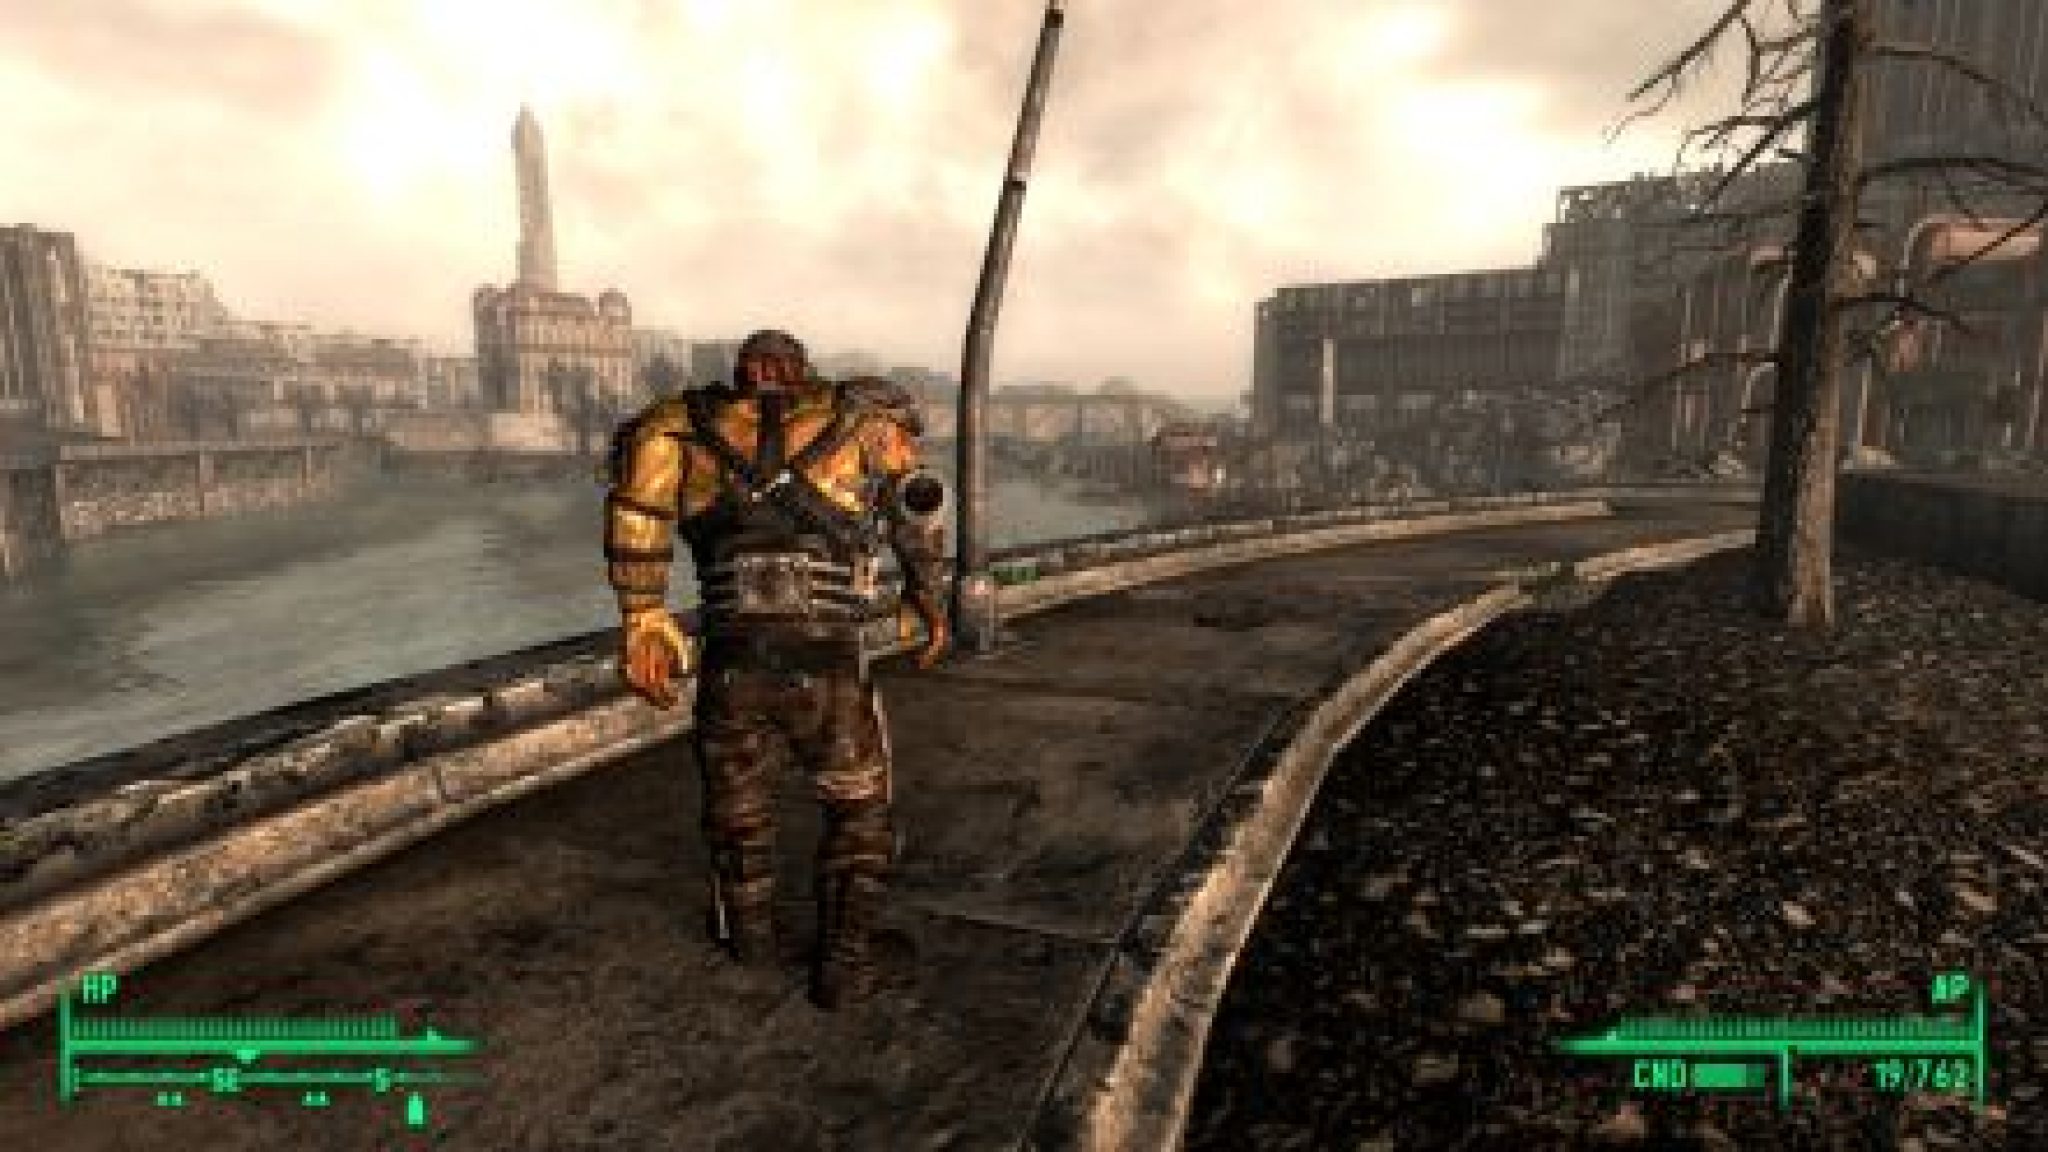 free for mac instal Fallout 2: A Post Nuclear Role Playing Game